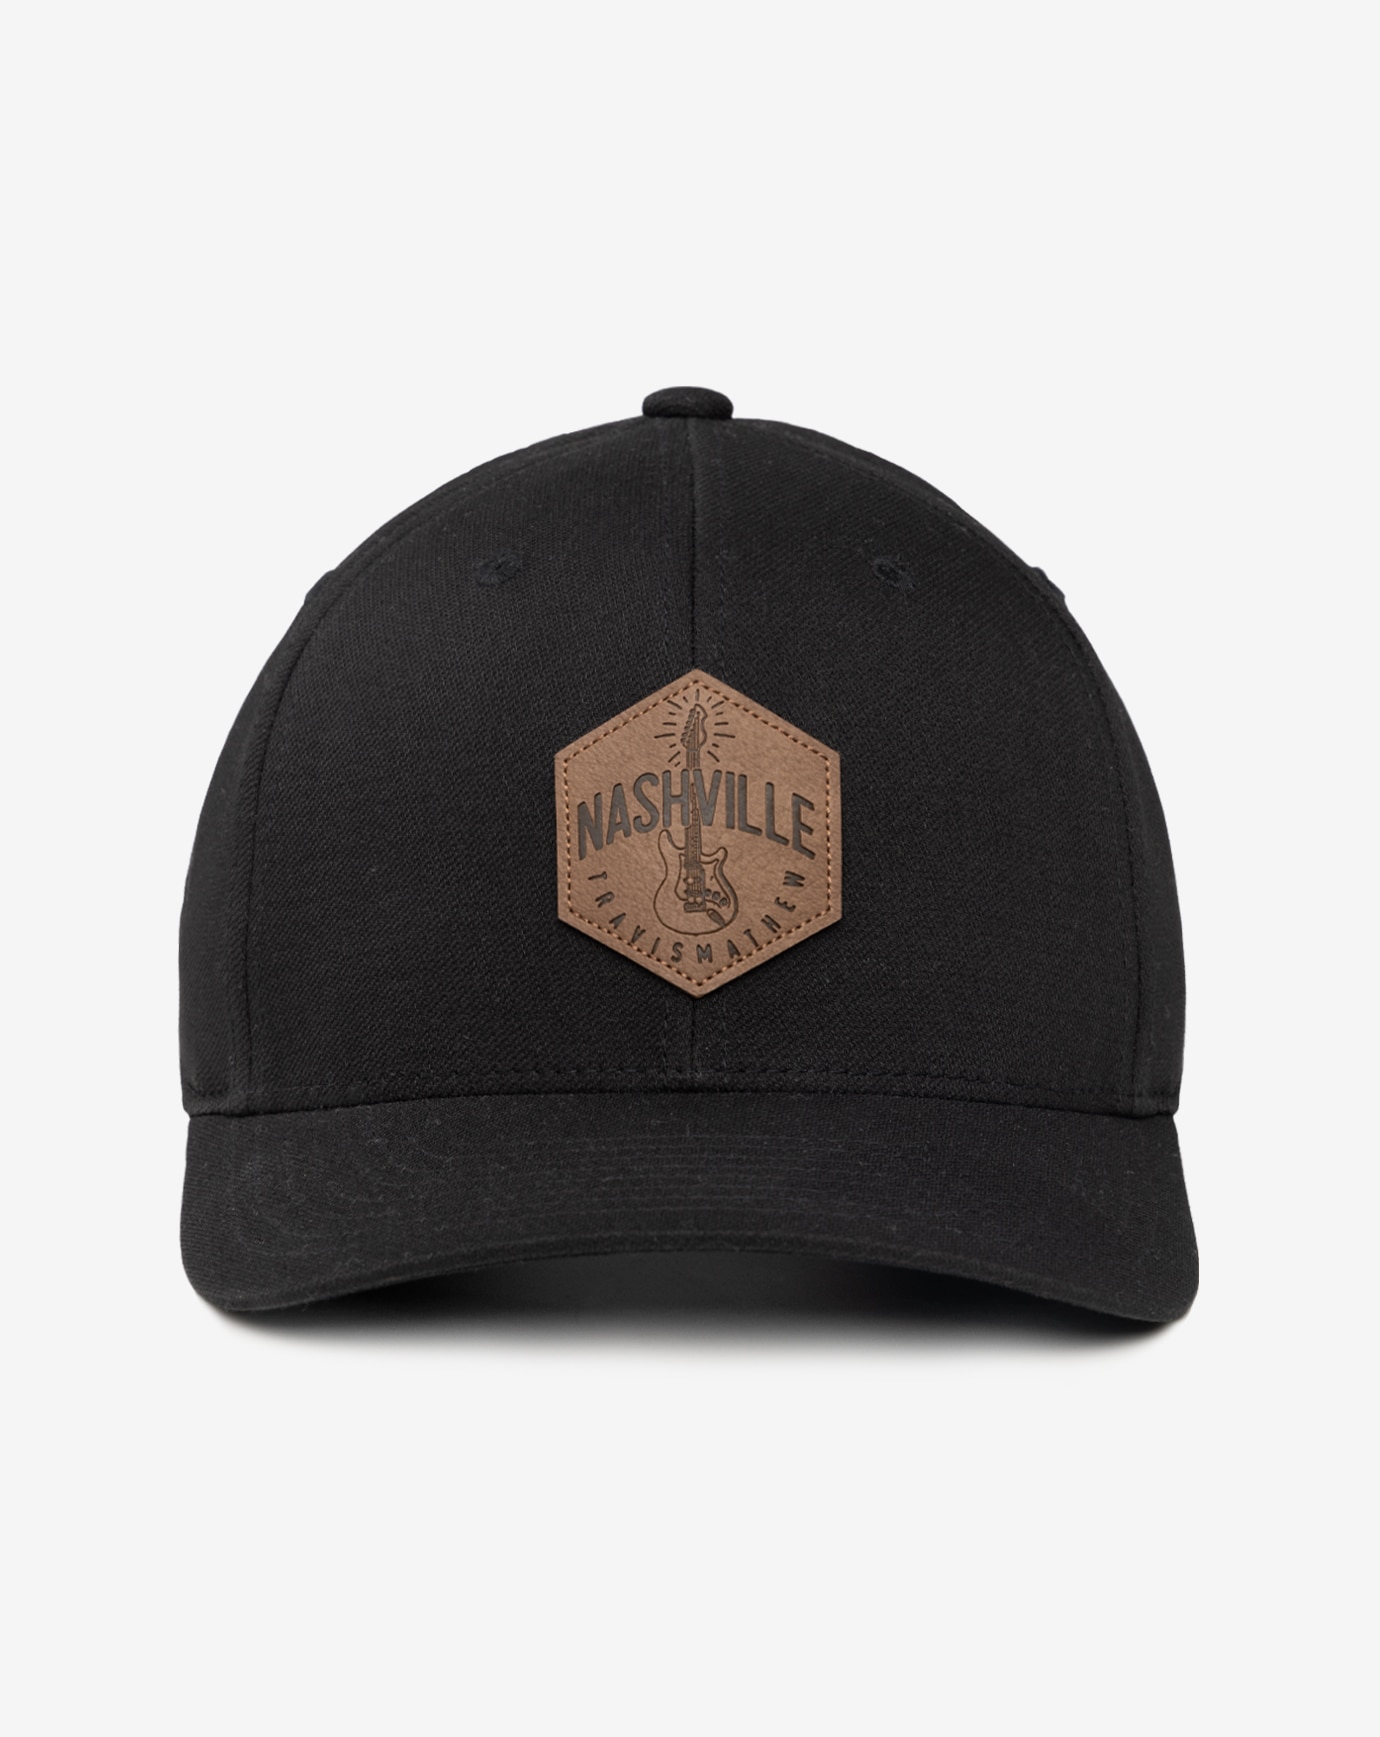 Related Product - ROADS END SNAPBACK HAT